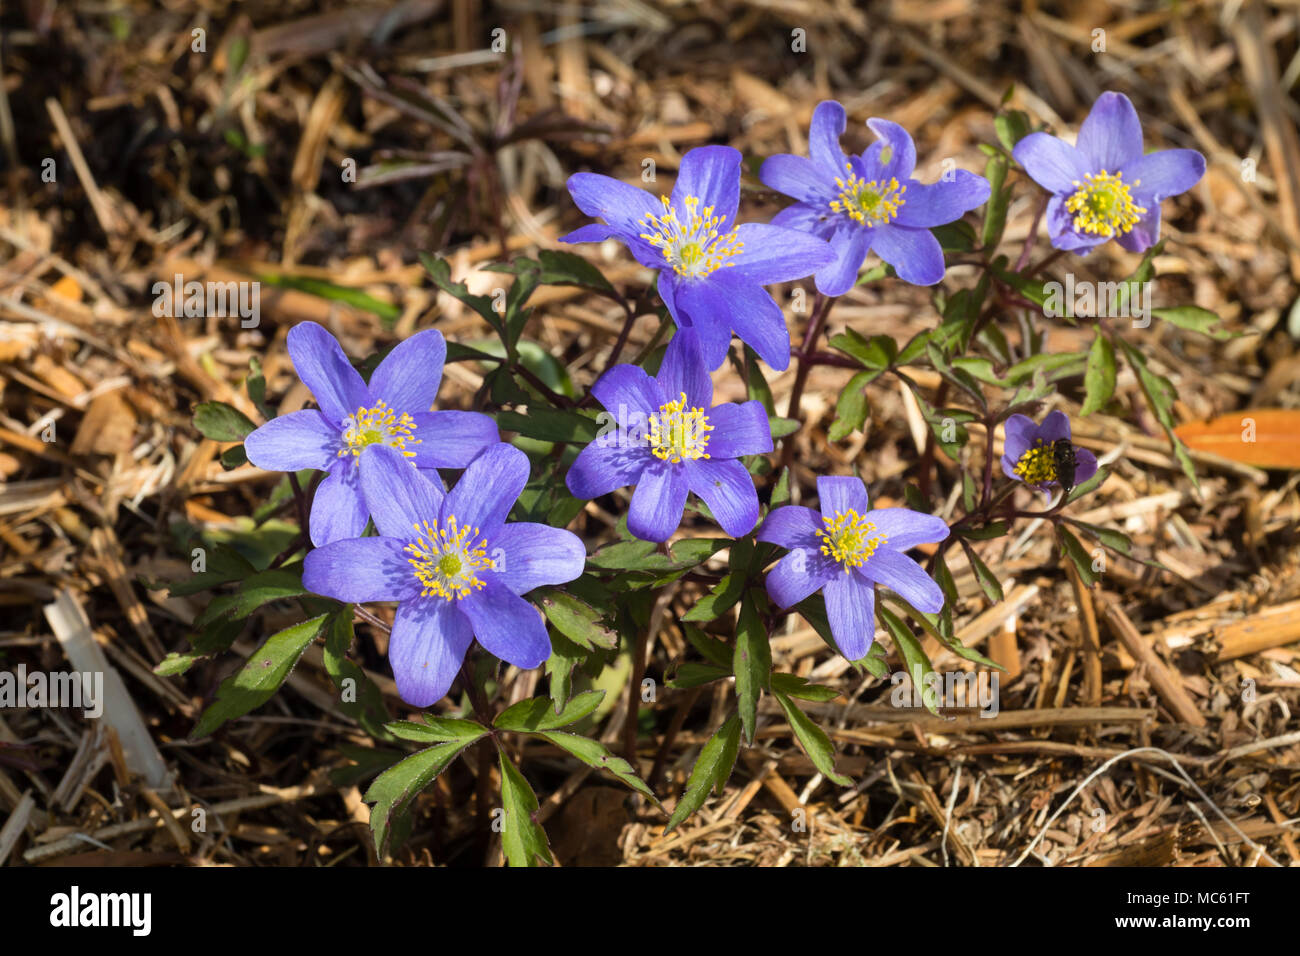 Yellow anthers contrast with blue petals i the selected form of the spring flowering wood anemone, Anemone nemorosa 'Mart's Blue' Stock Photo